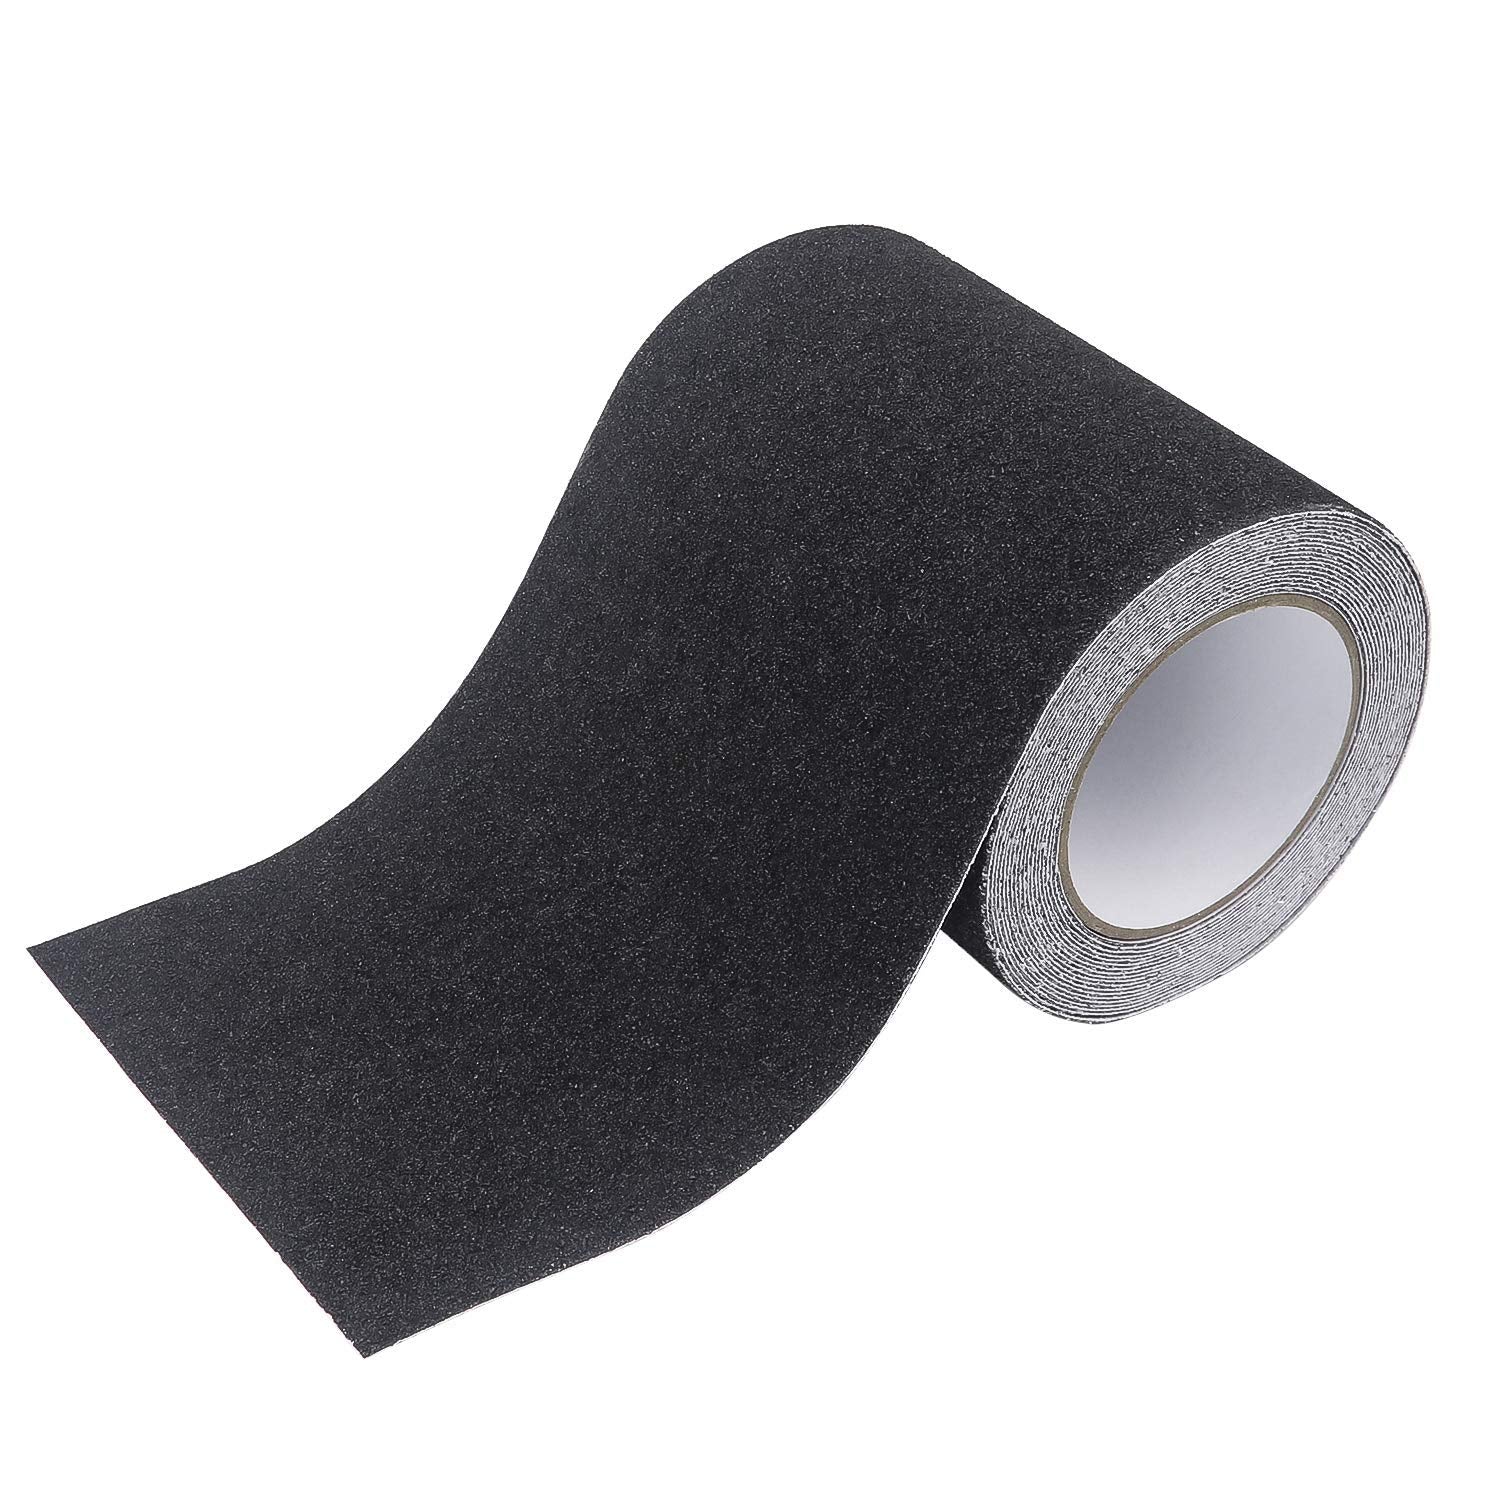 Anti Slip Tape | Good Grip, Friction | Safety Anti Skid Tapes for Slippery floors LifeKrafts